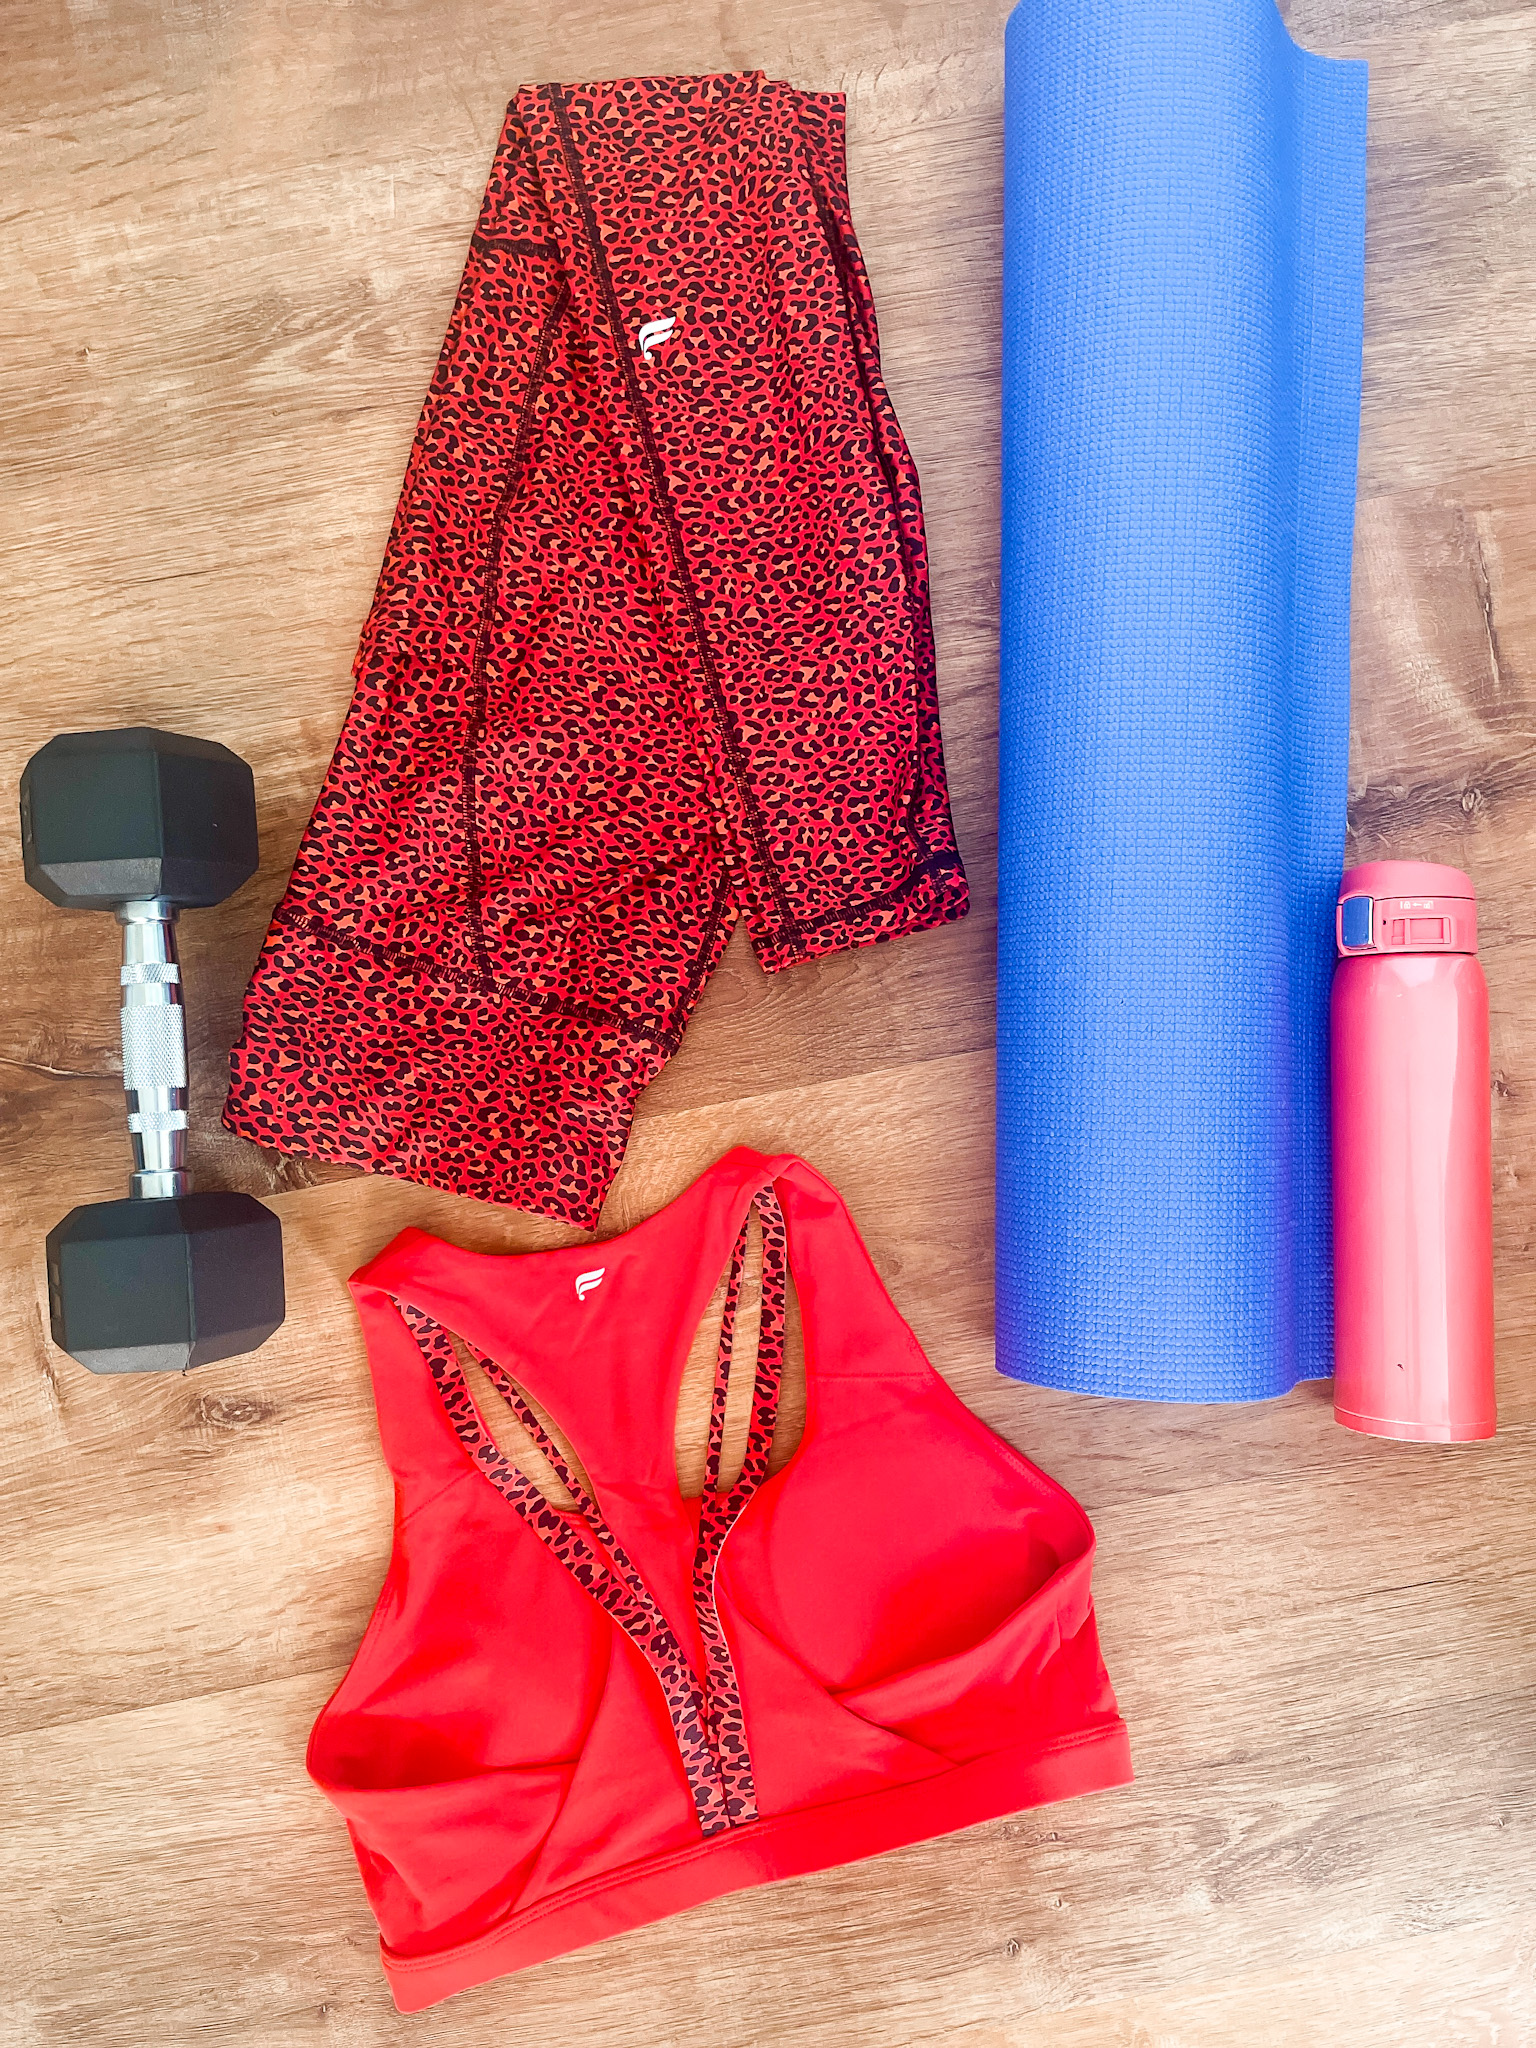 Fabletics vs. lululemon: Which Activewear Wins?